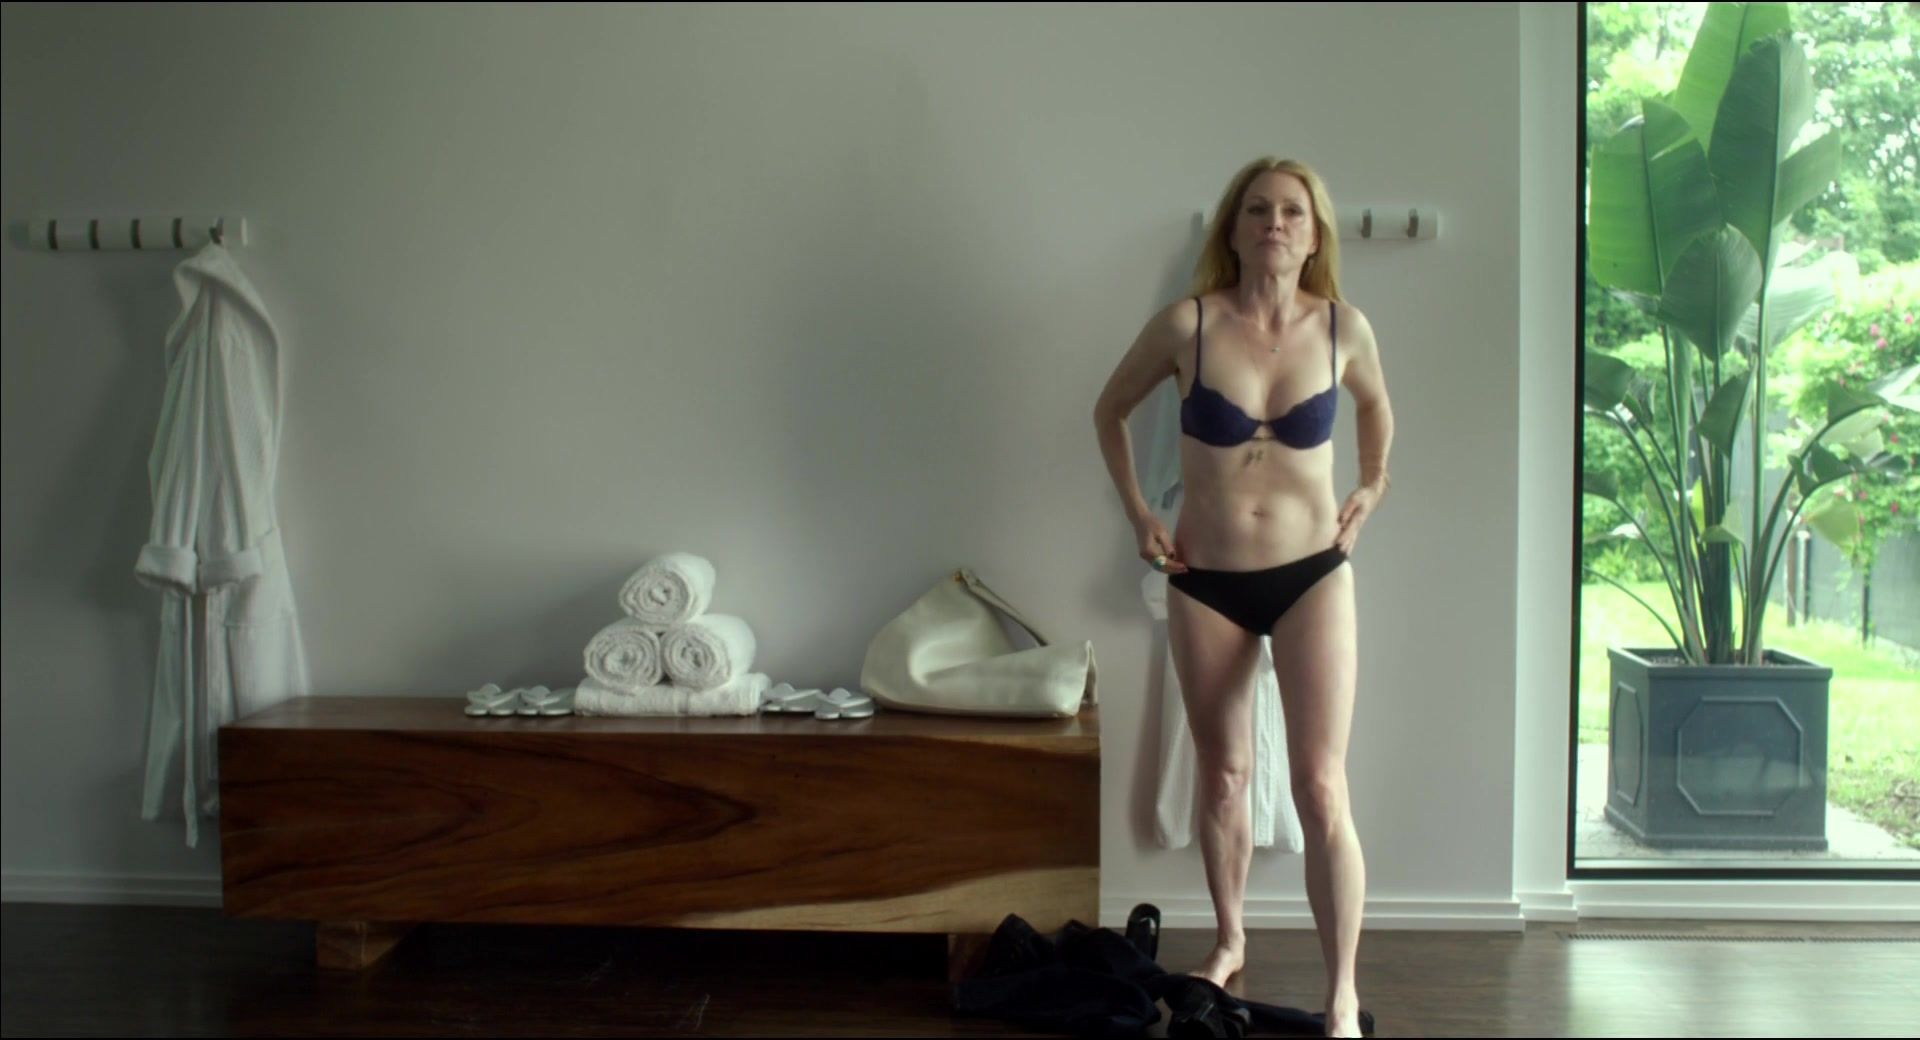 Atm All Nude and HOT Scene of the movie "Maps to the Stars" Nsfw Gifs